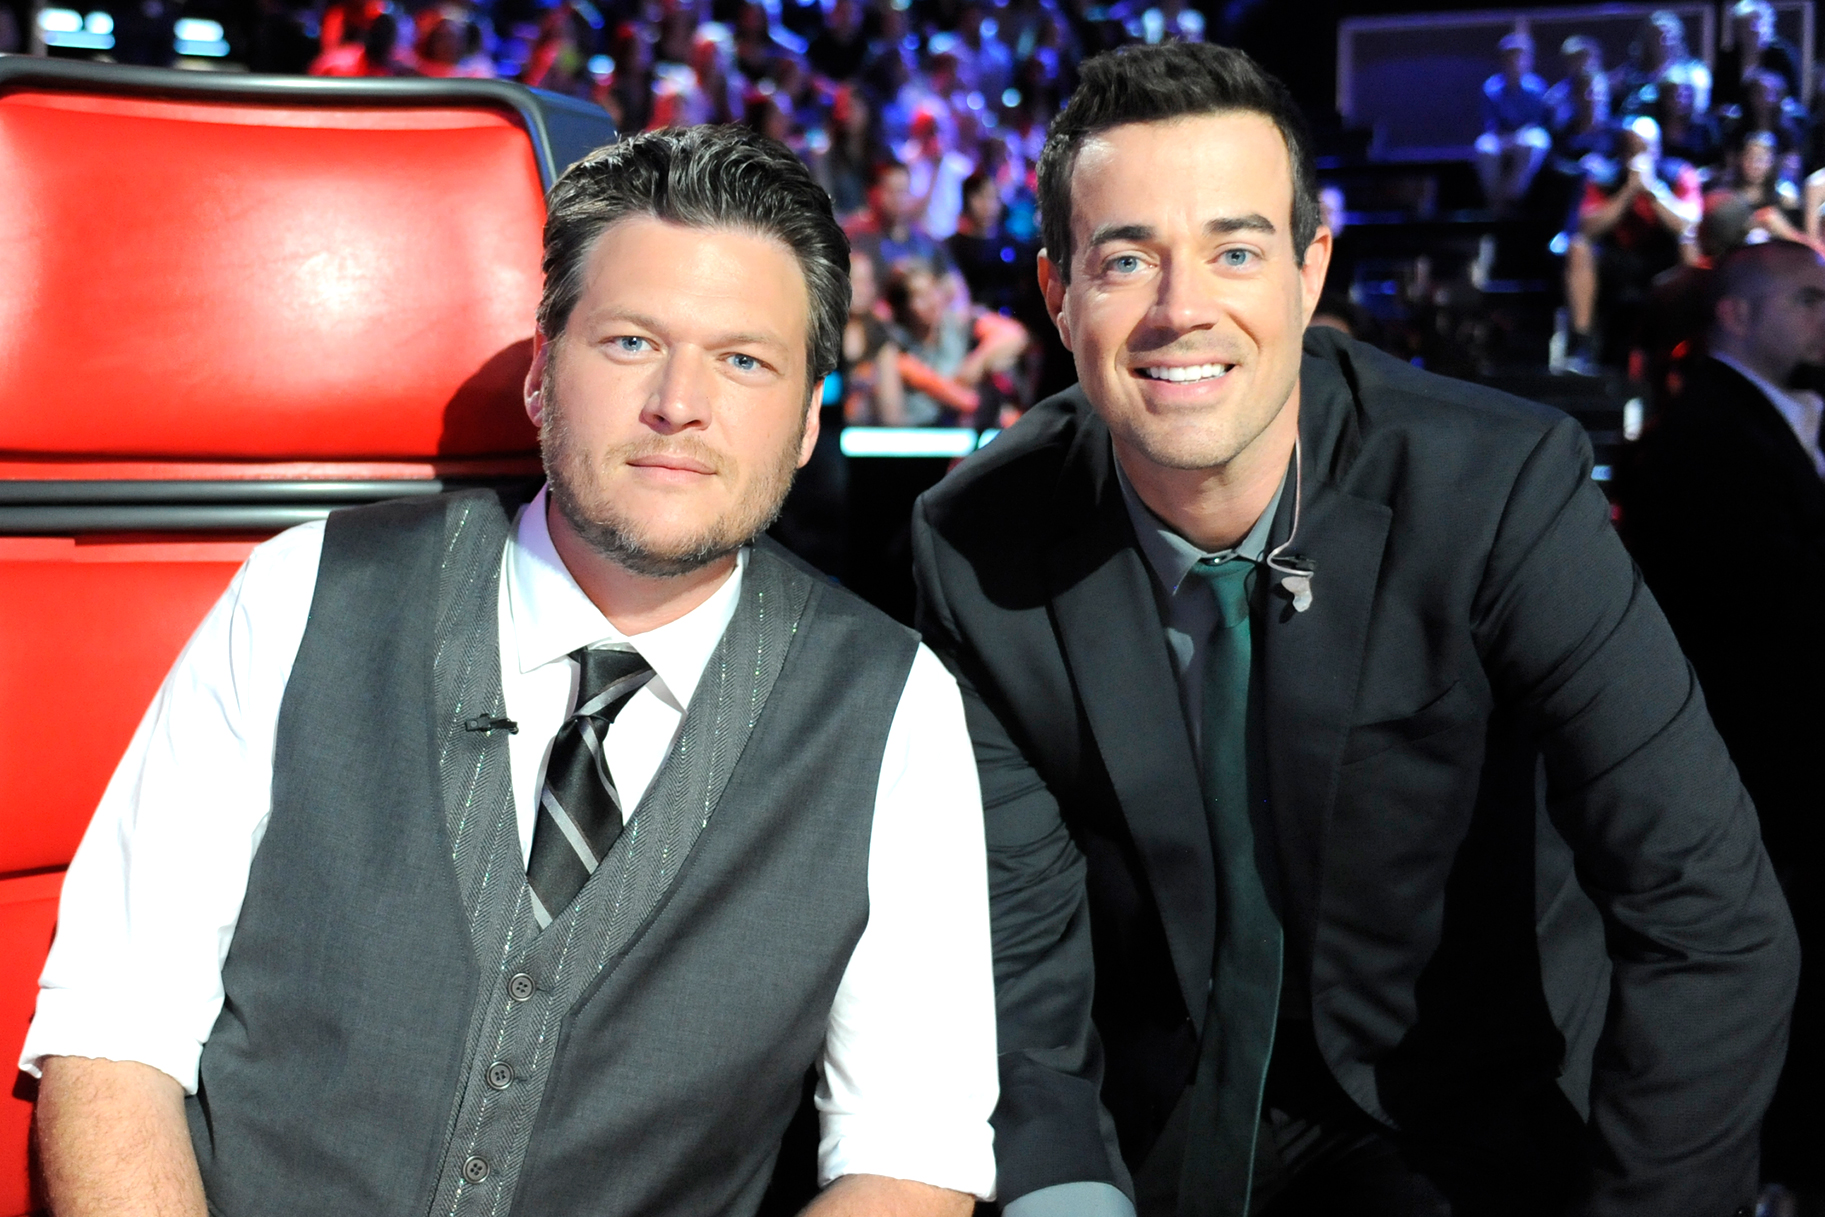 Blake Shelton and Carson Daly on the voice